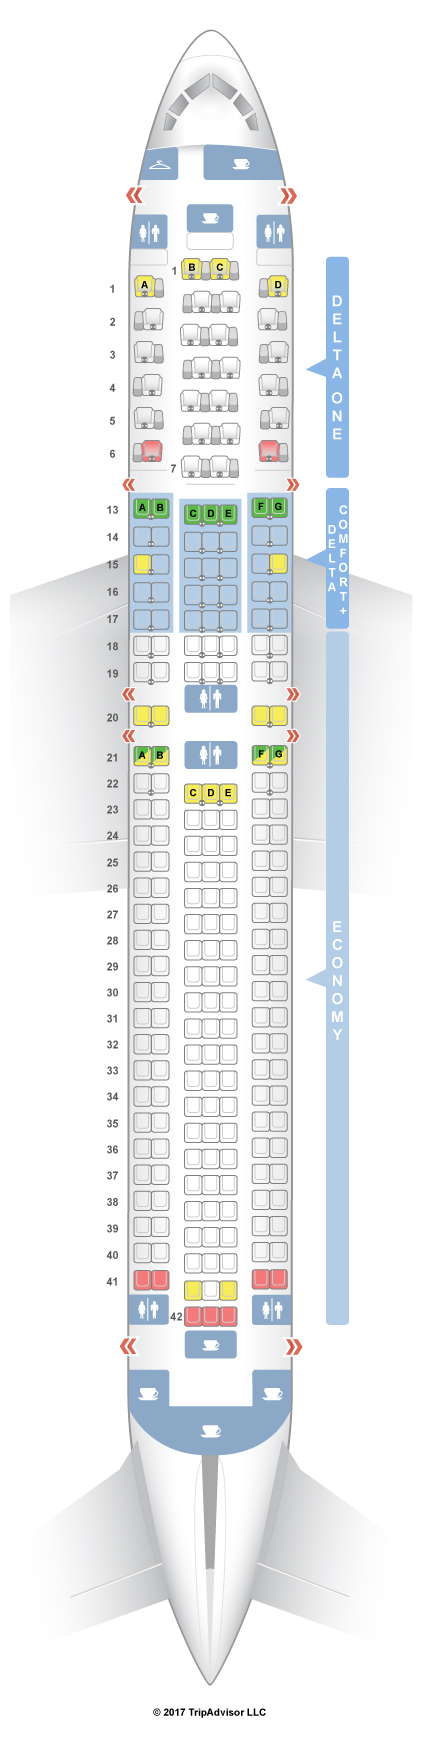 delta airlines seat layout